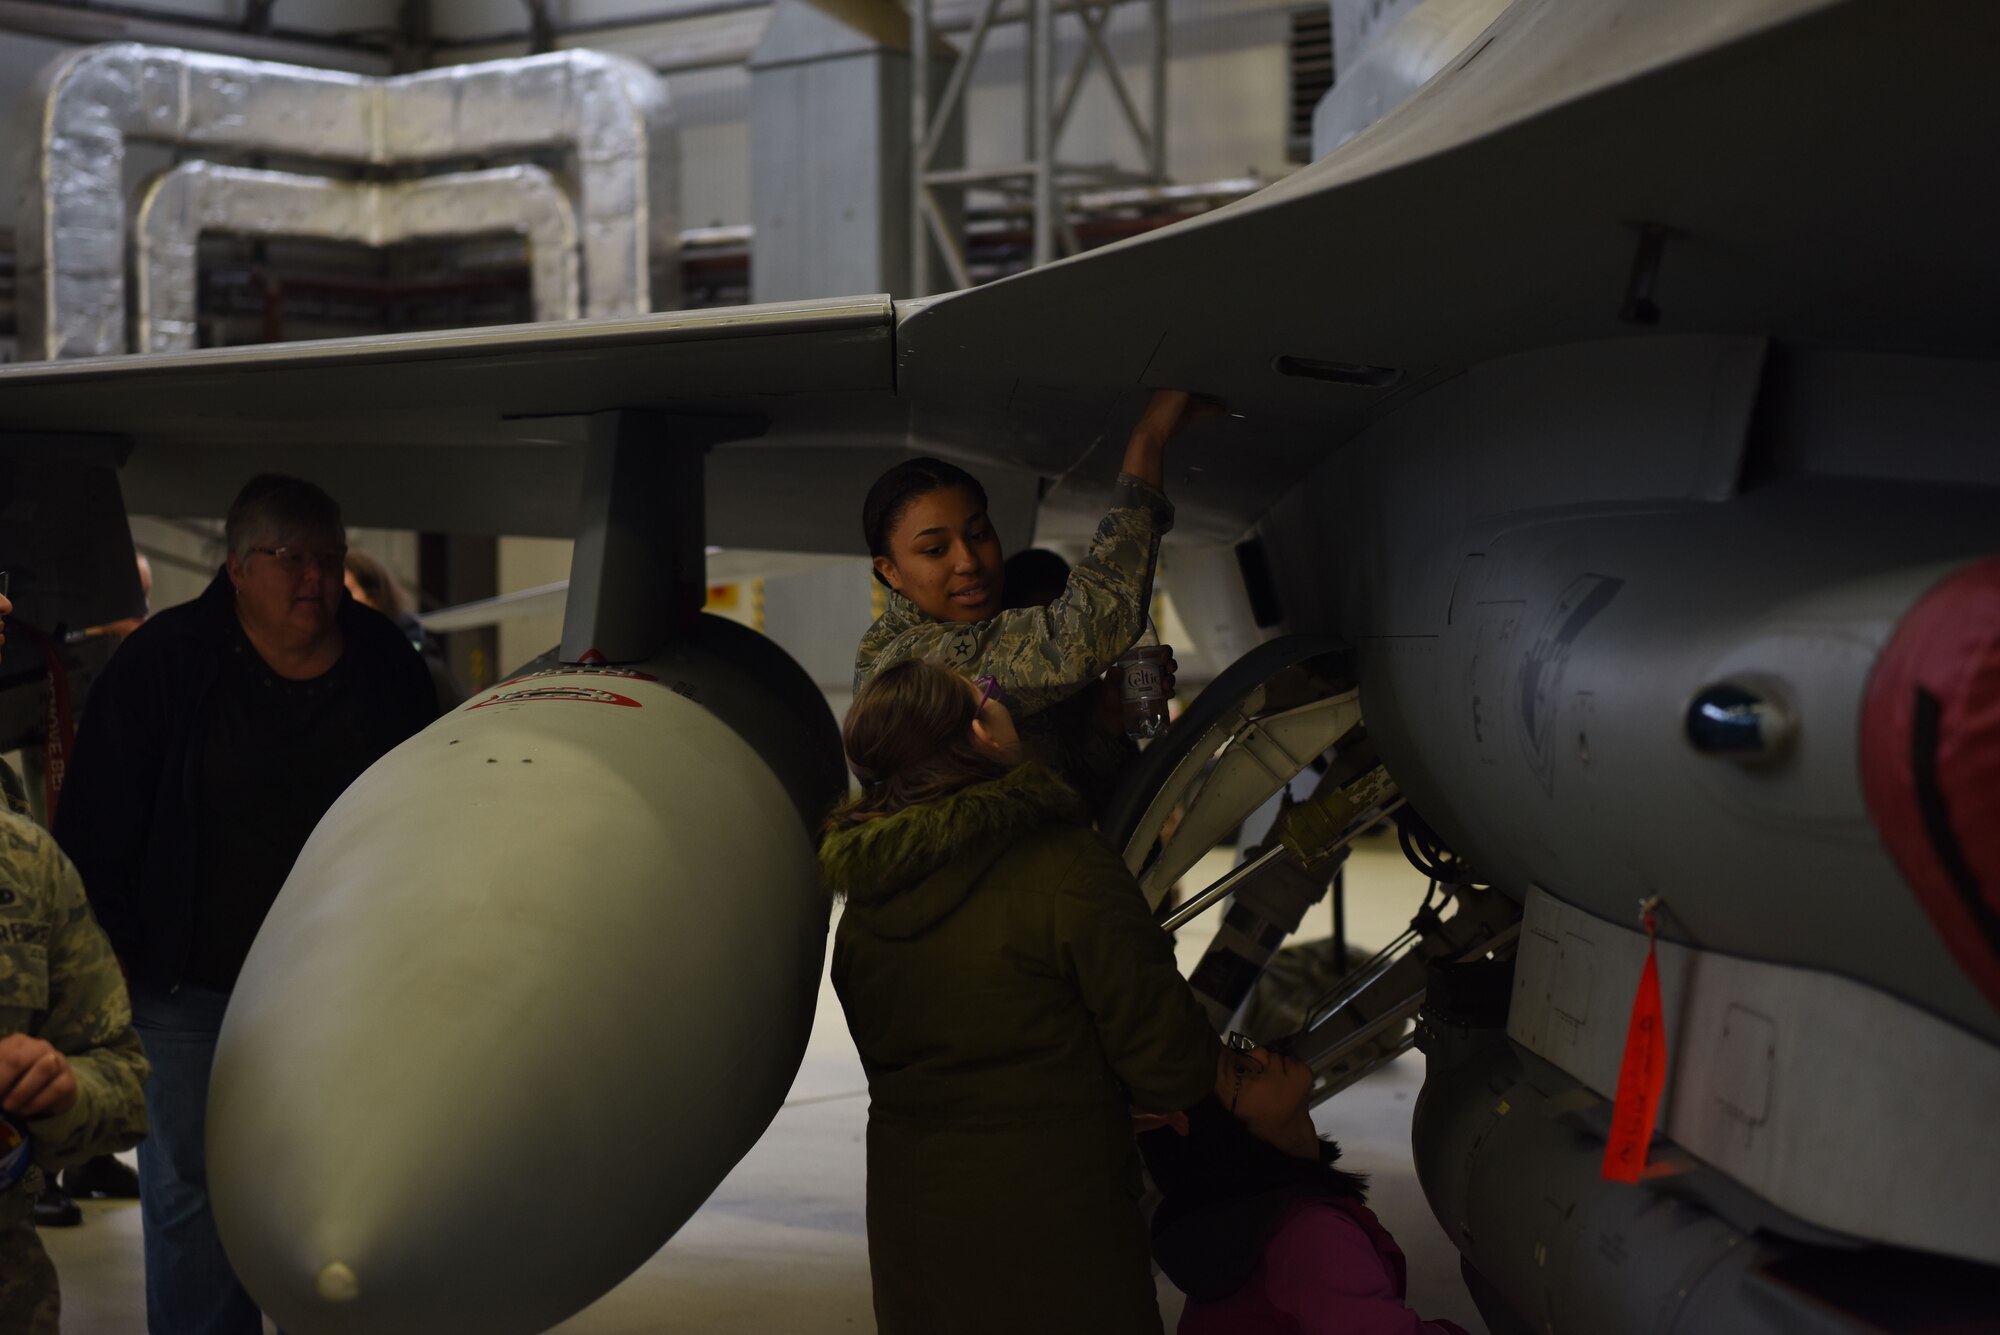 Airman 1st Class Kayla Harper, 52nd Maintenance Group crew chief, Spangdahlem Air Base, Germany shows a Kaiserslautern Military Community school student the specifications of an F-16 Fighting Falcon on Ramstein Air Base, Germany, March, 9, 2019. Harper showed her knowledge of the F-16 Fighting Falcon’s compartments, while leading a hands-on tour of the aircraft.